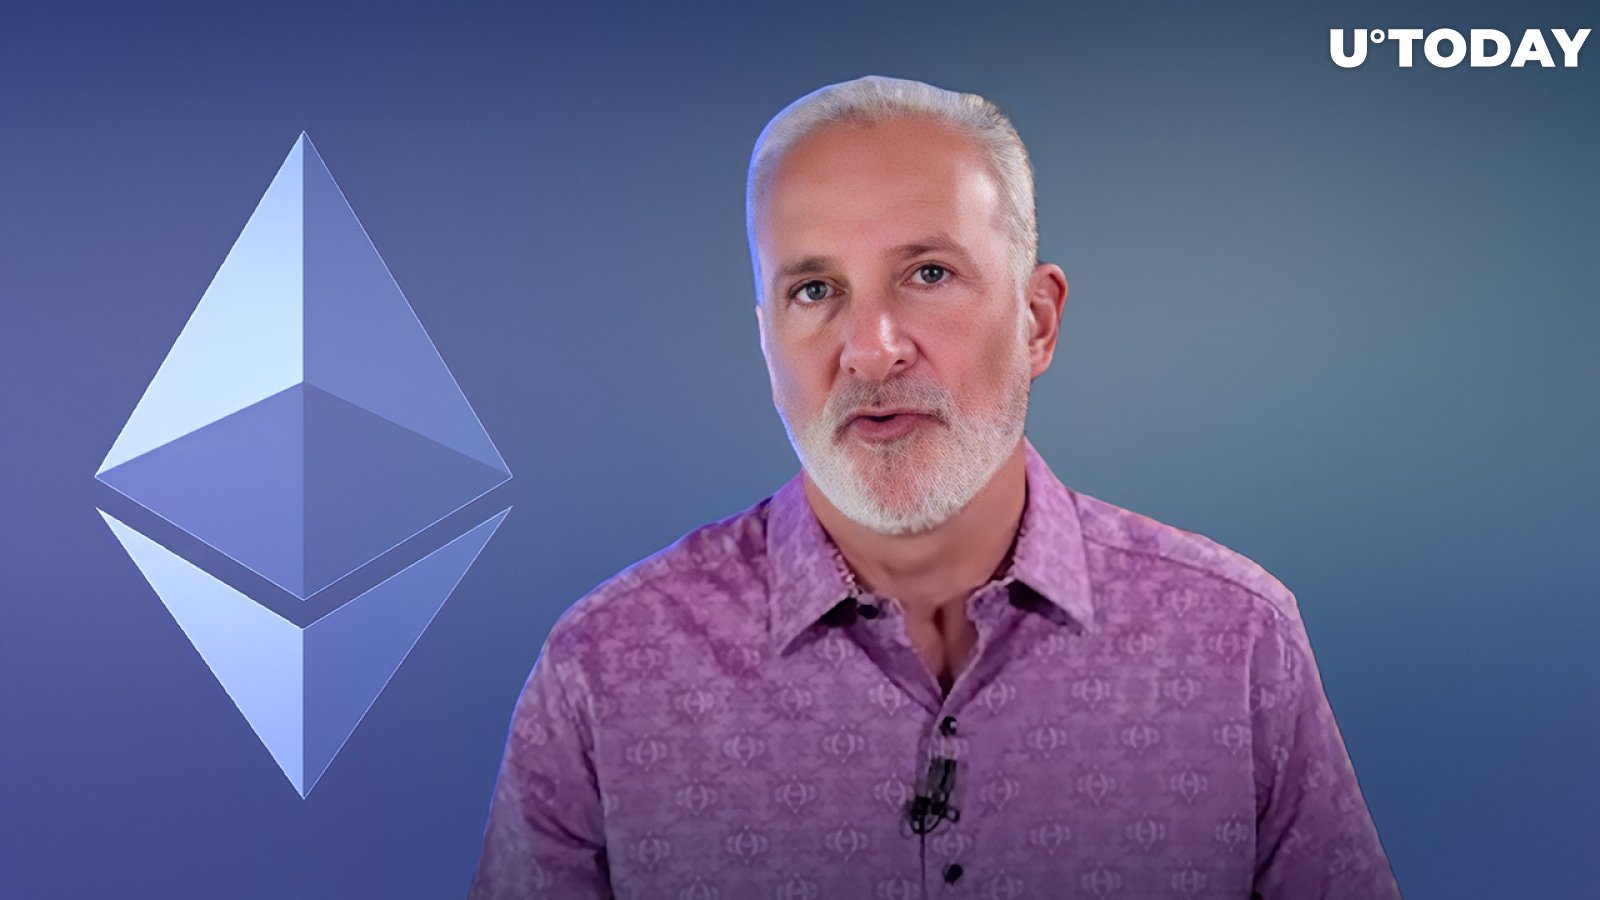 "Ominous" Combination of Patterns for Ethereum Confirmed: Peter Schiff